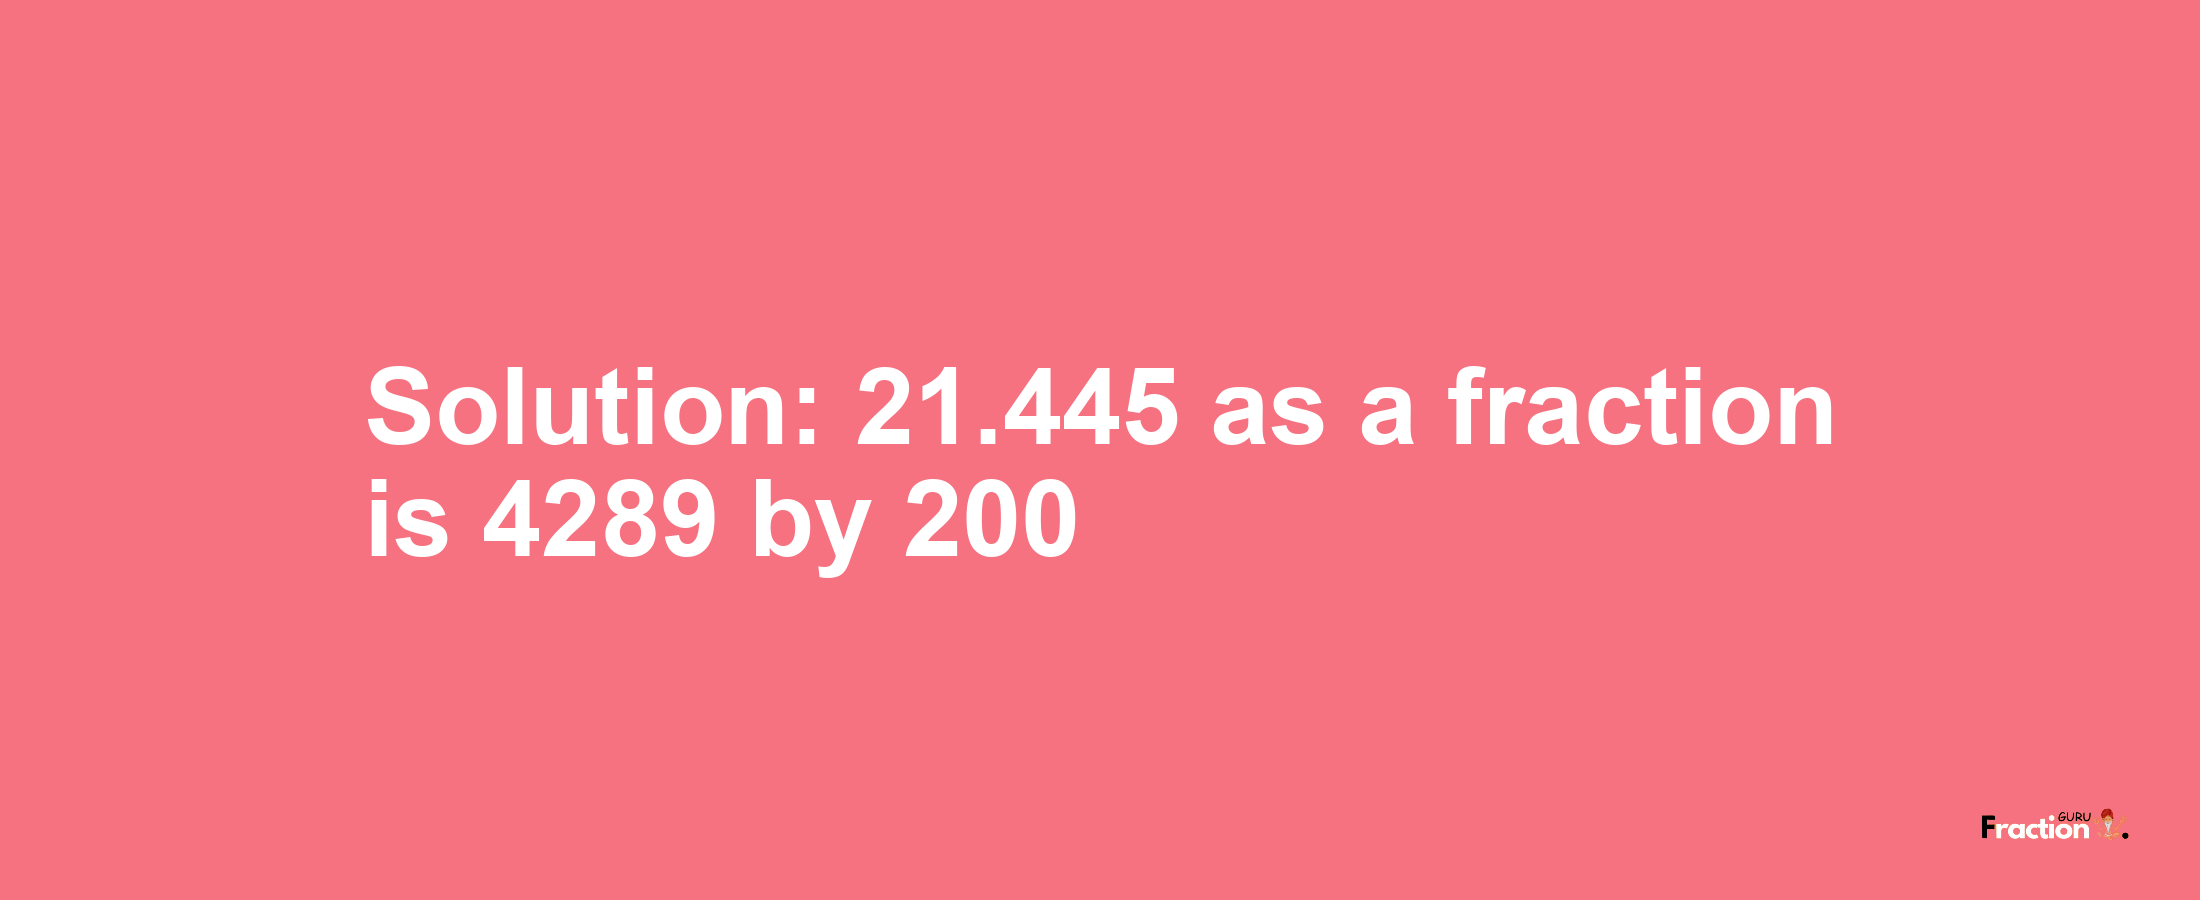 Solution:21.445 as a fraction is 4289/200